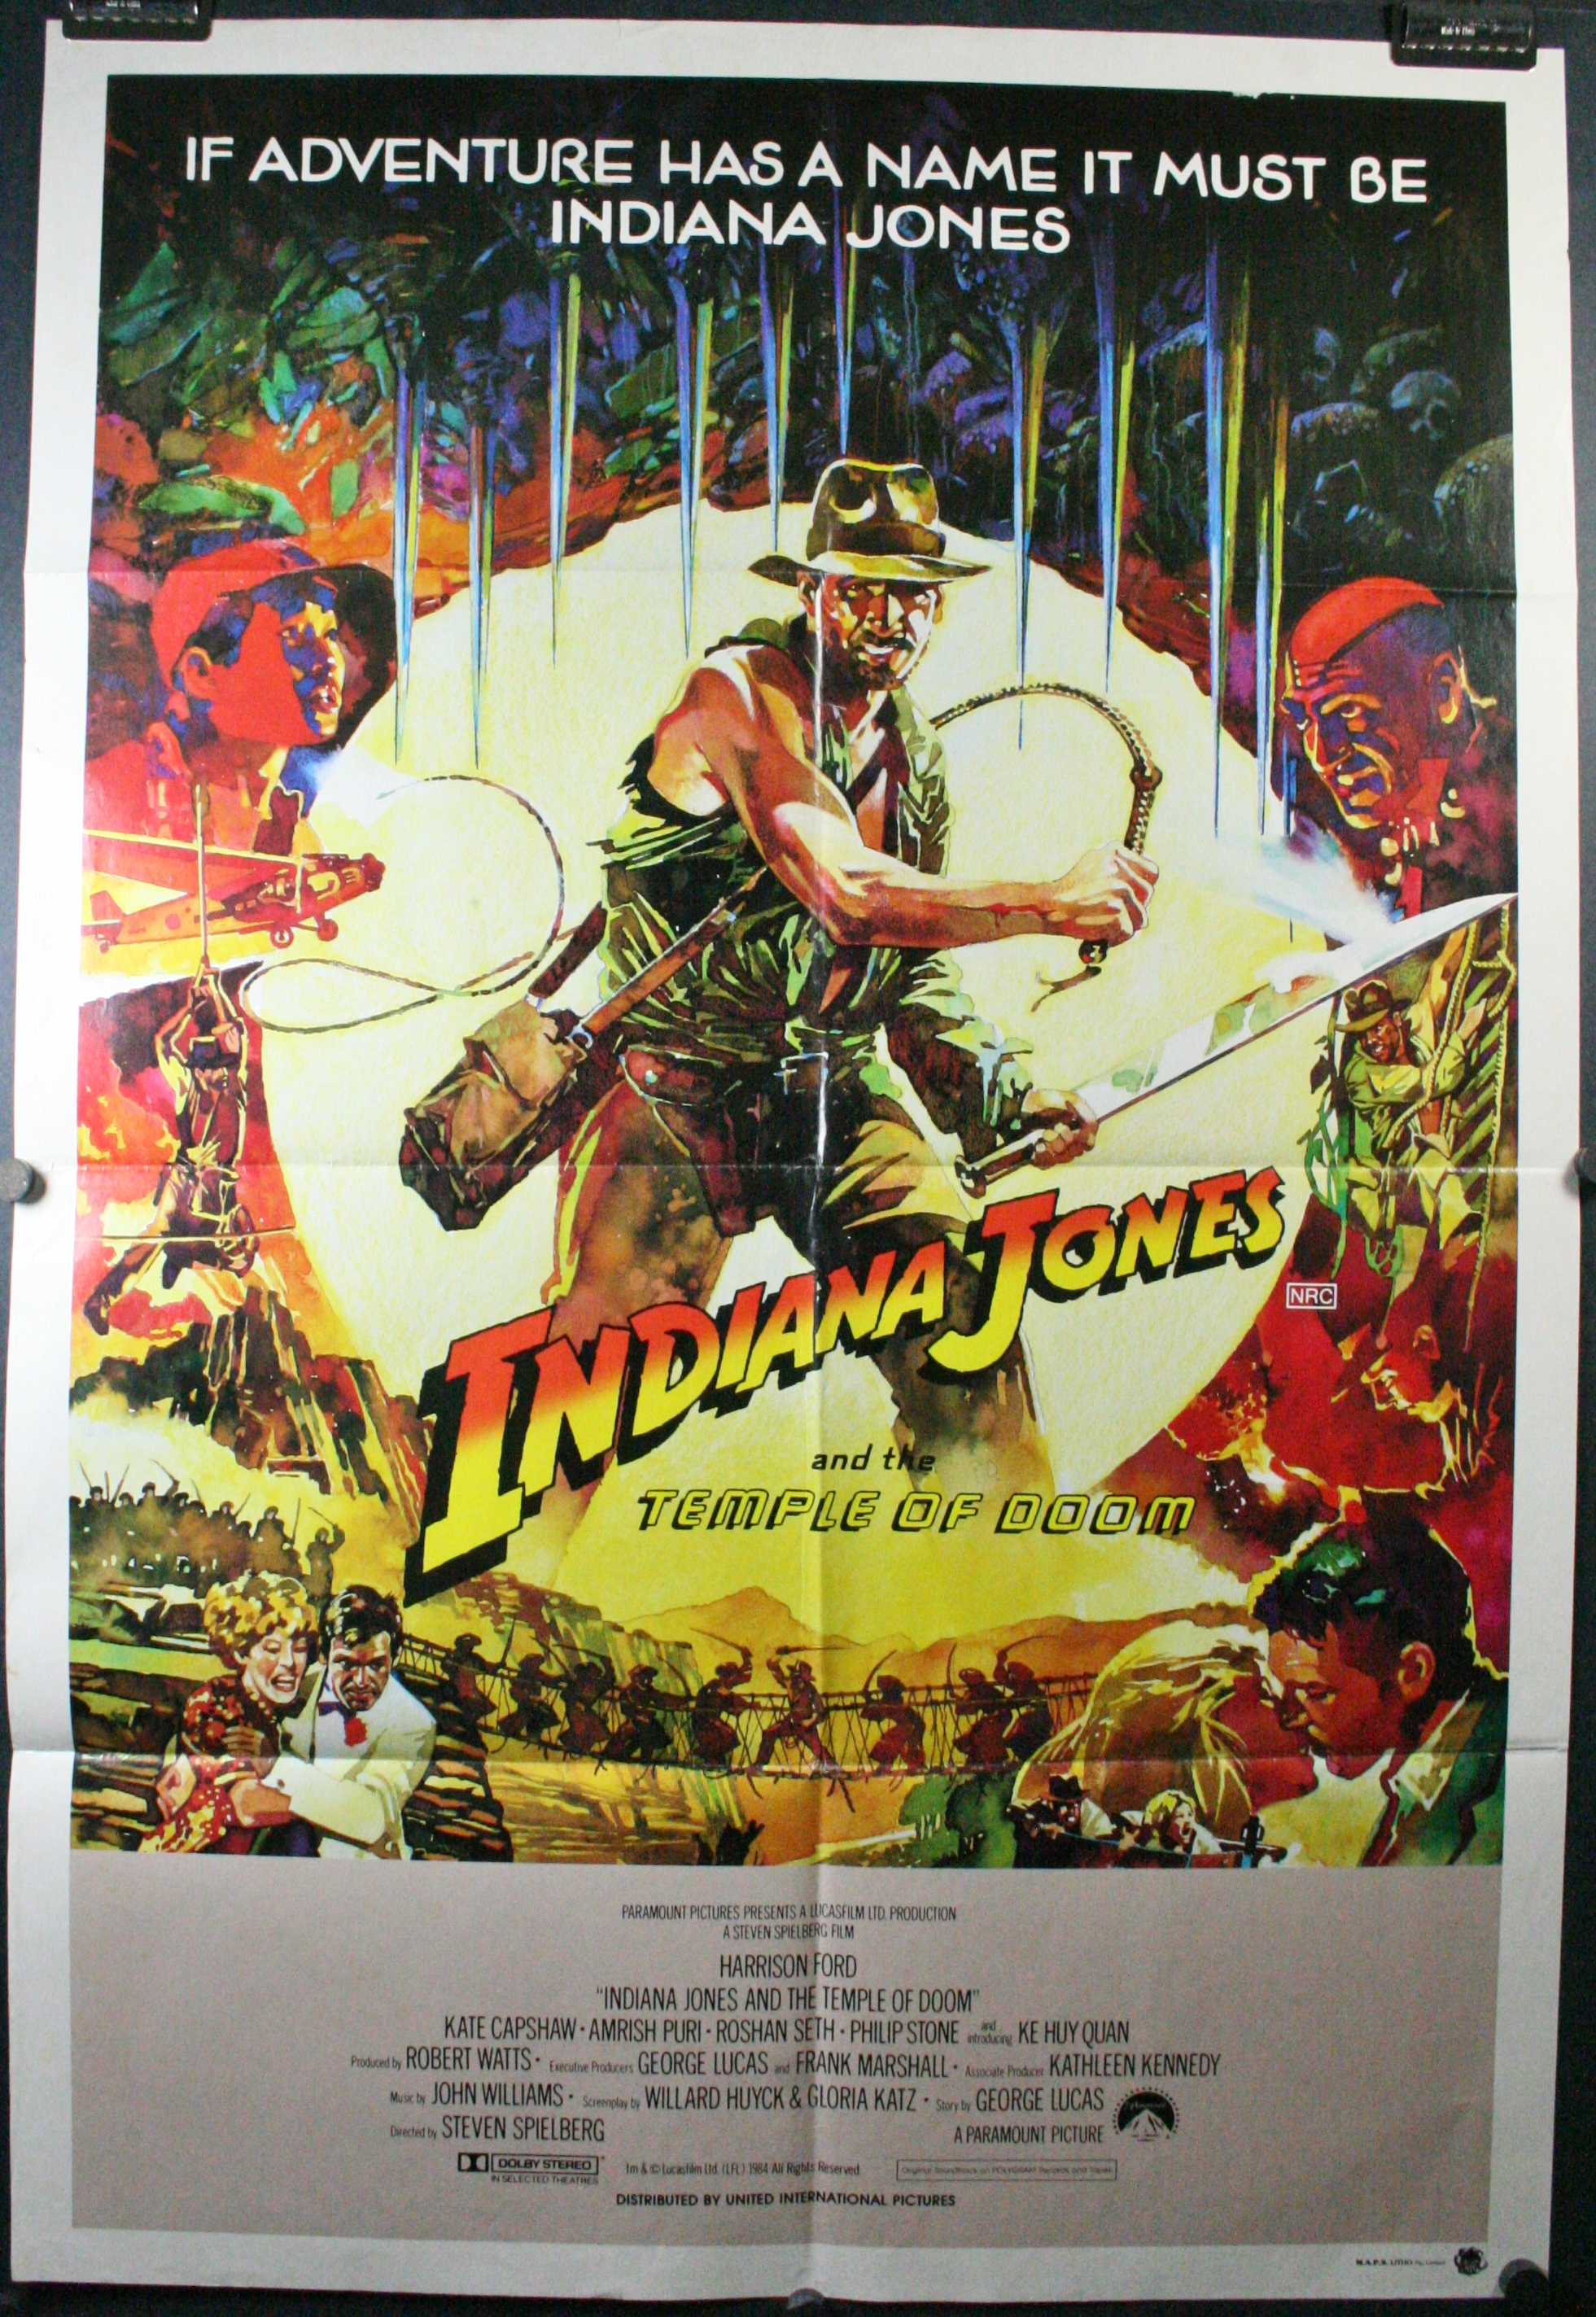 INDIANA JONES AND THE TEMPLE OF DOOM MOVIE POSTER 27x40 ORIGINAL ADVANCE STYLE